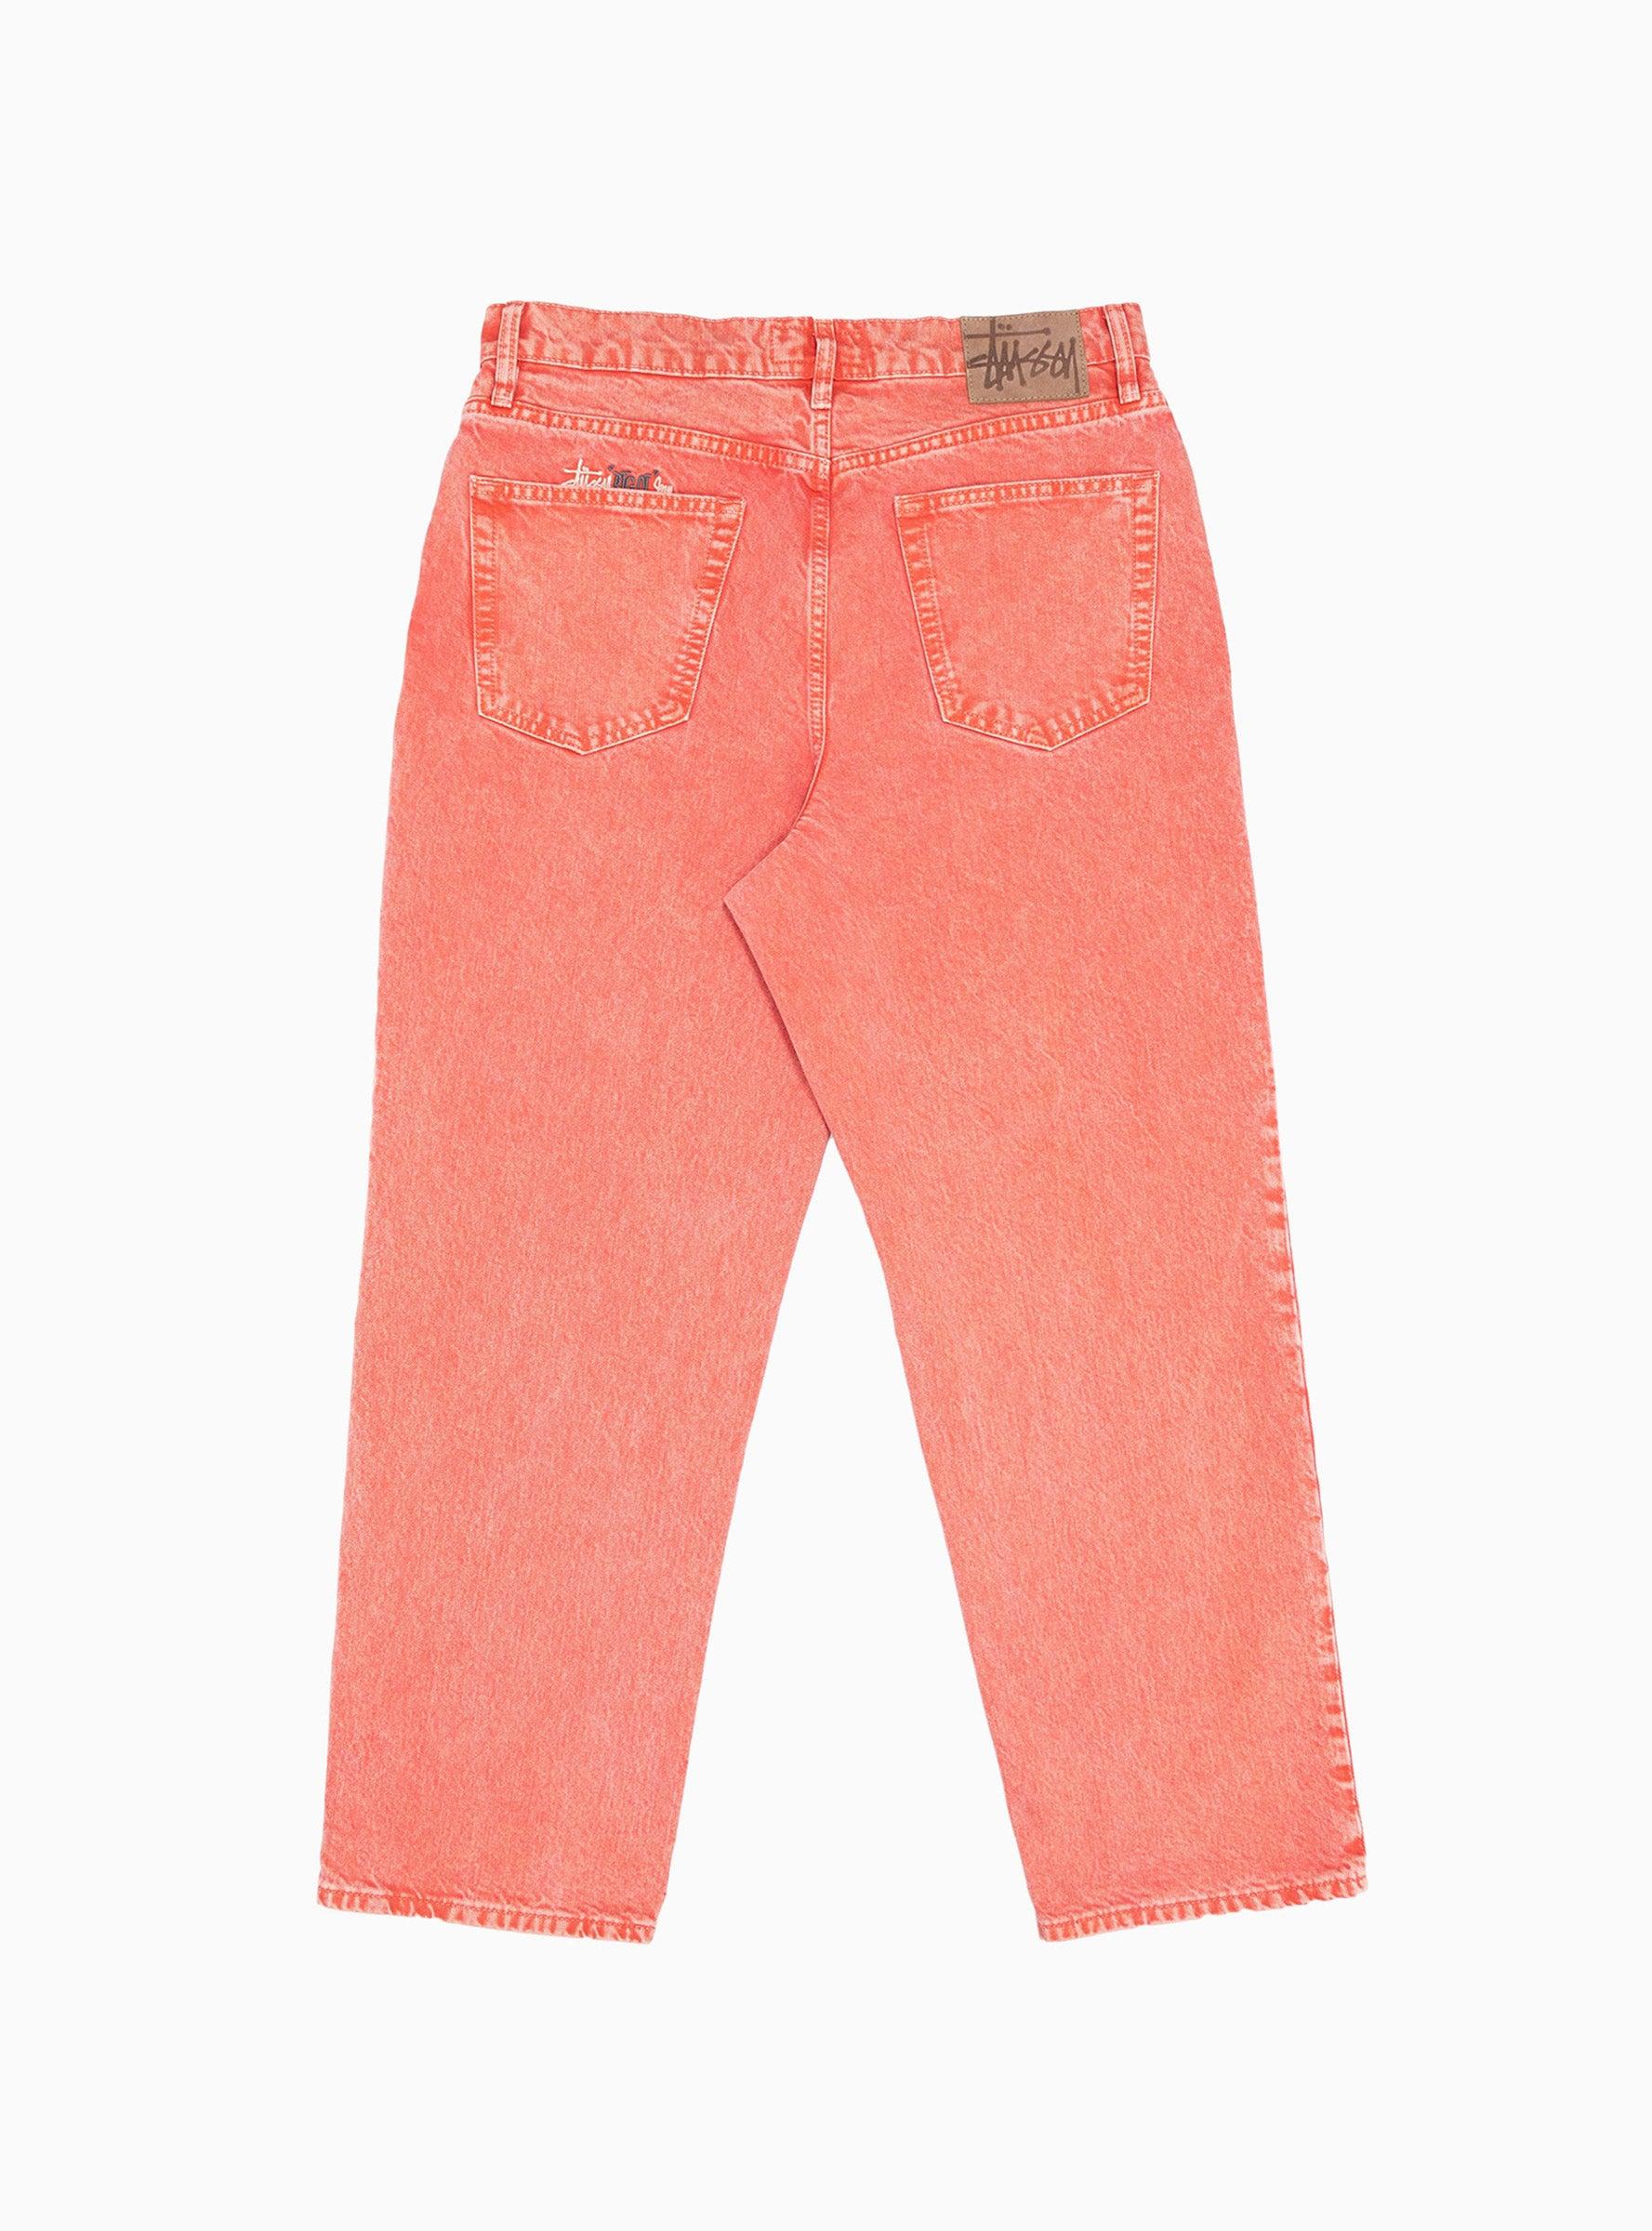 Stussy Double Dye Big Ol' Jeans Faded Red in Pink for Men